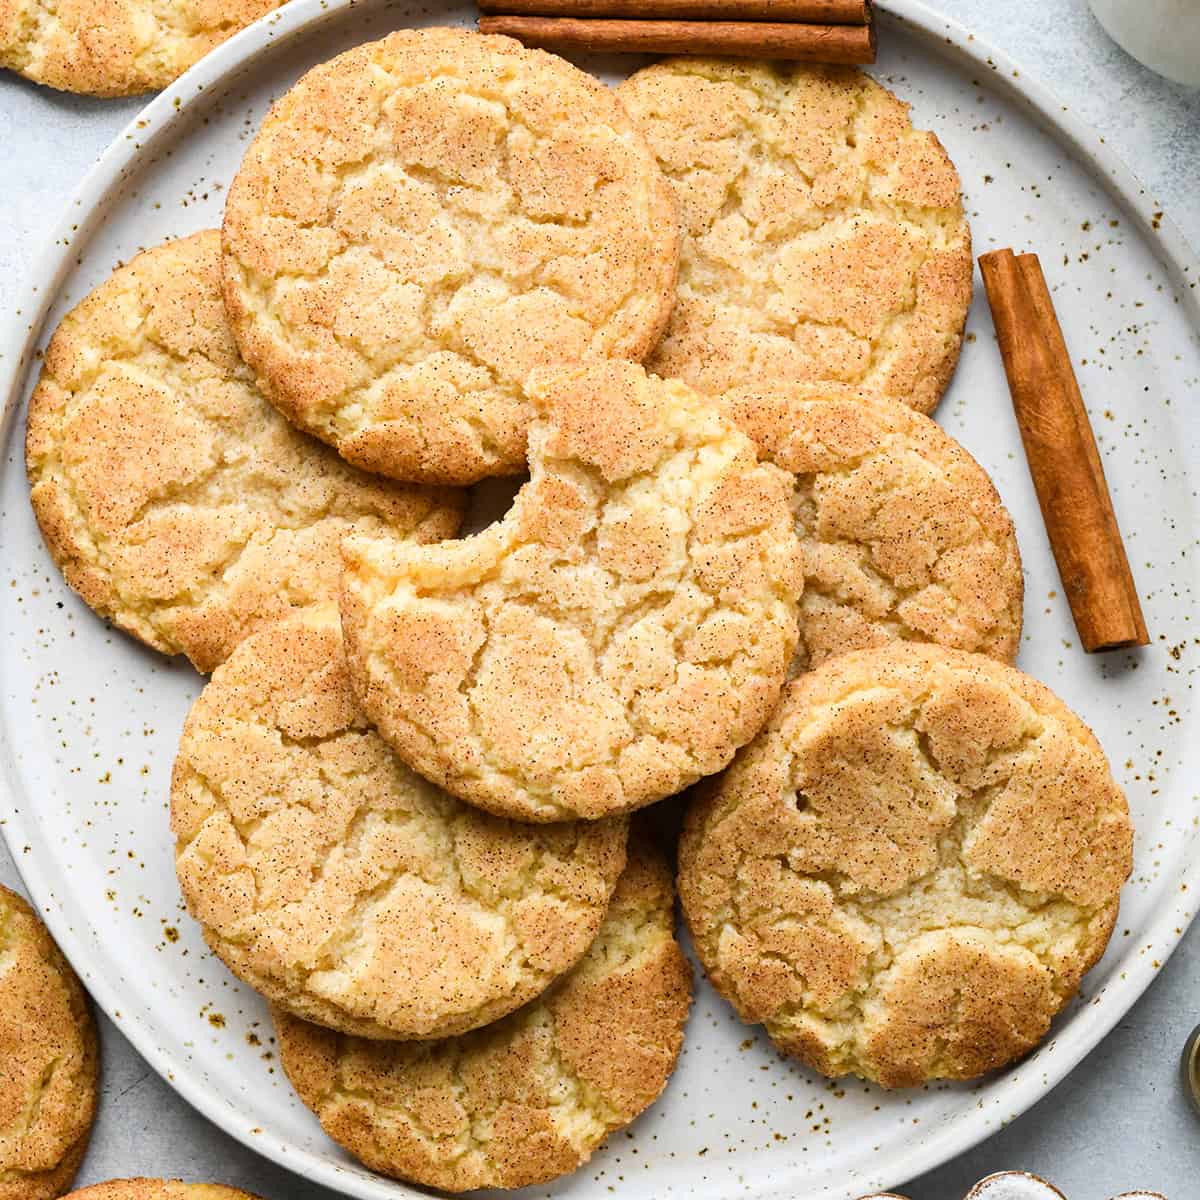 8 snickerdoodle cookies on a plate, one has a bite taken out of it